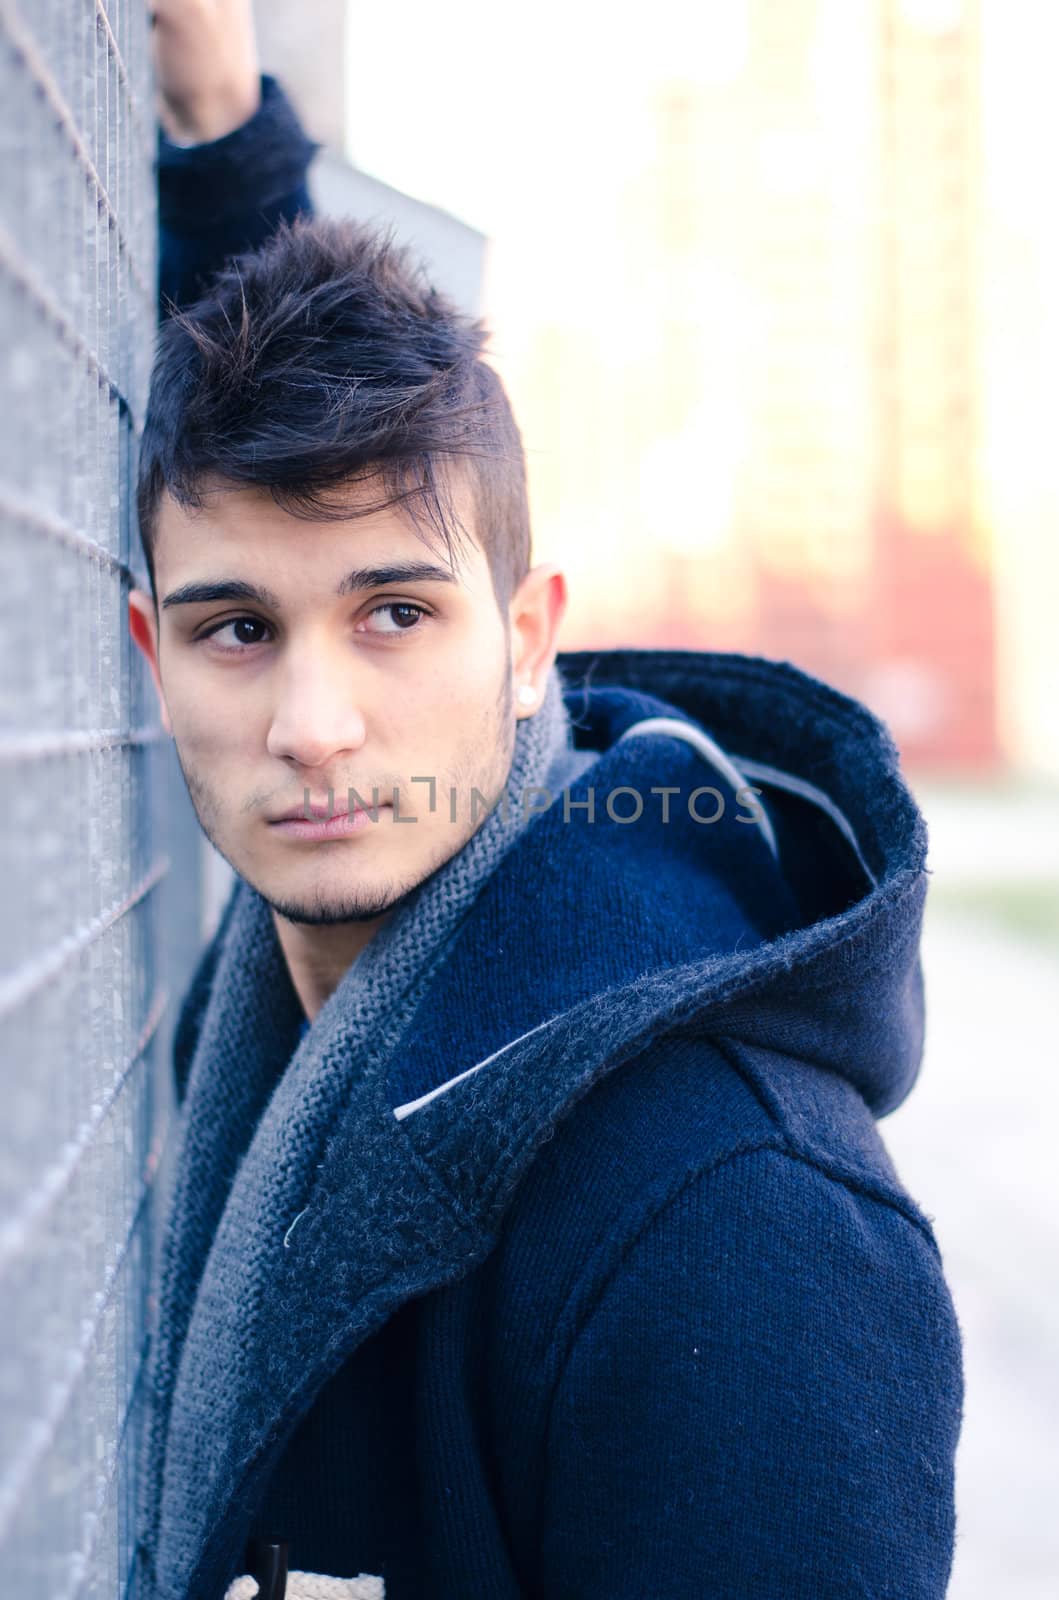 Good looking young man leaning against metal grid, urban setting and environment